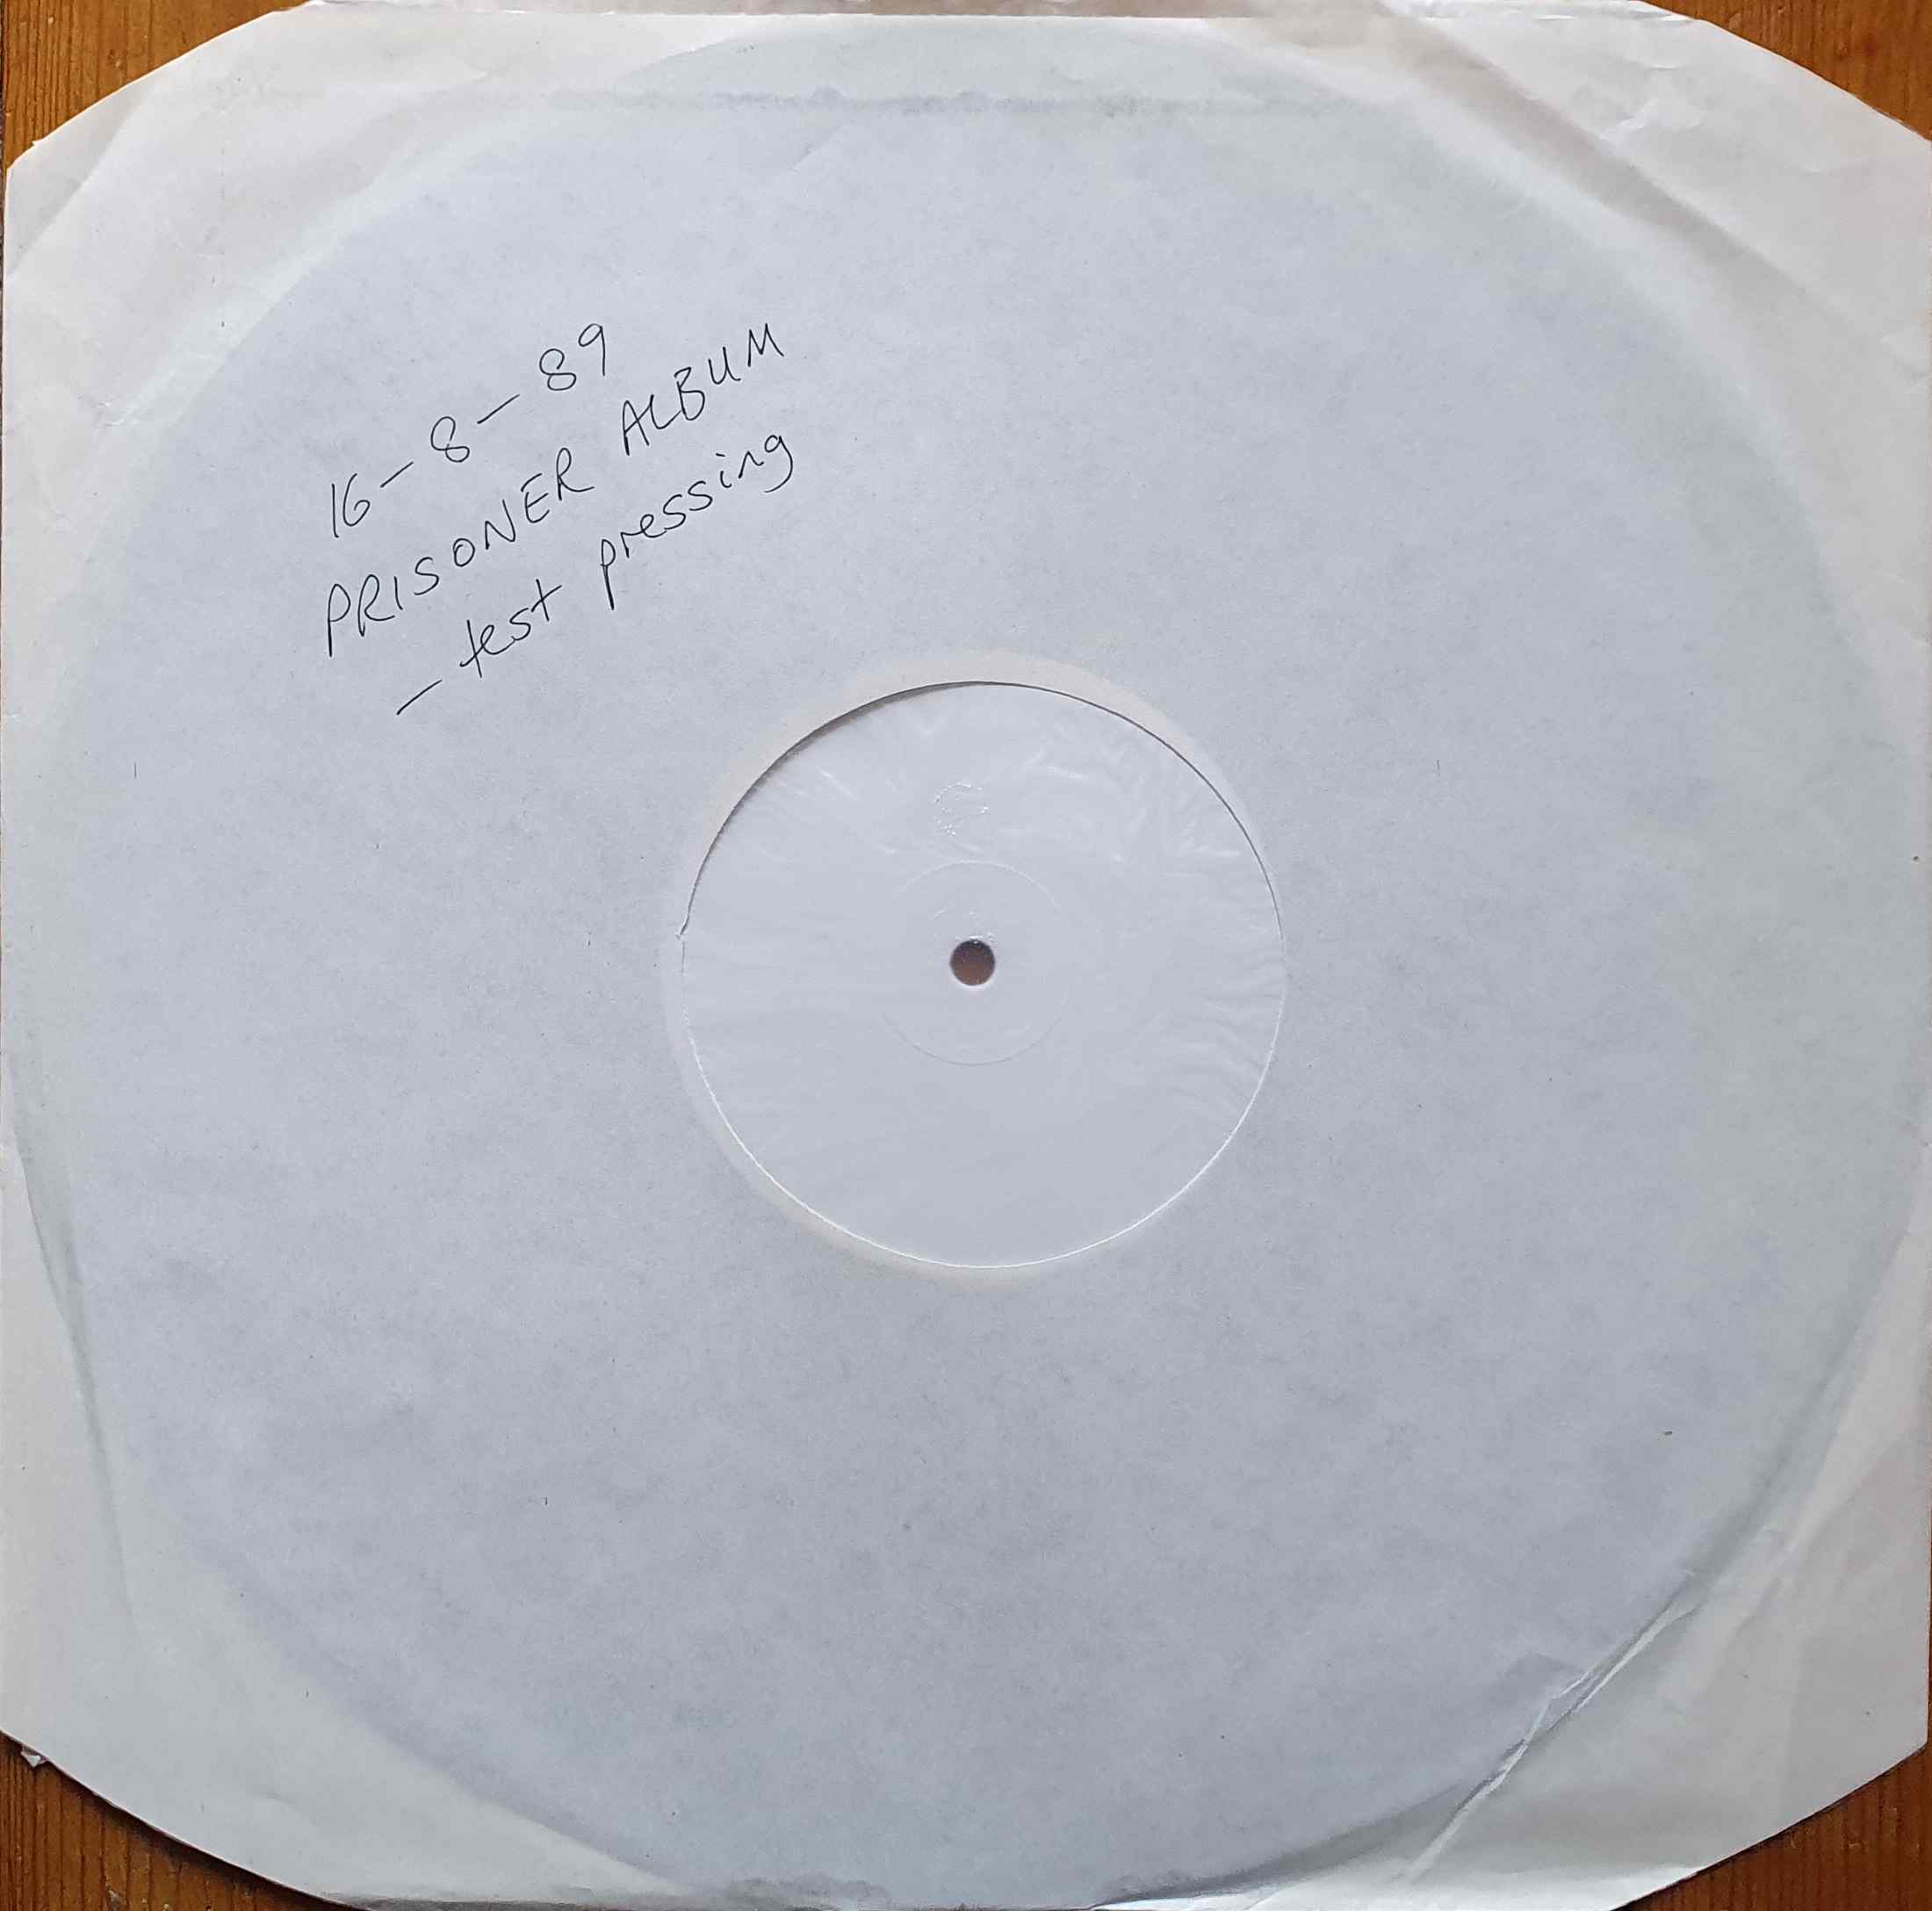 Picture of FILM 042 WL The prisoner - Re-release (W/L test pressing) by artist Various from ITV, Channel 4 and Channel 5 albums library